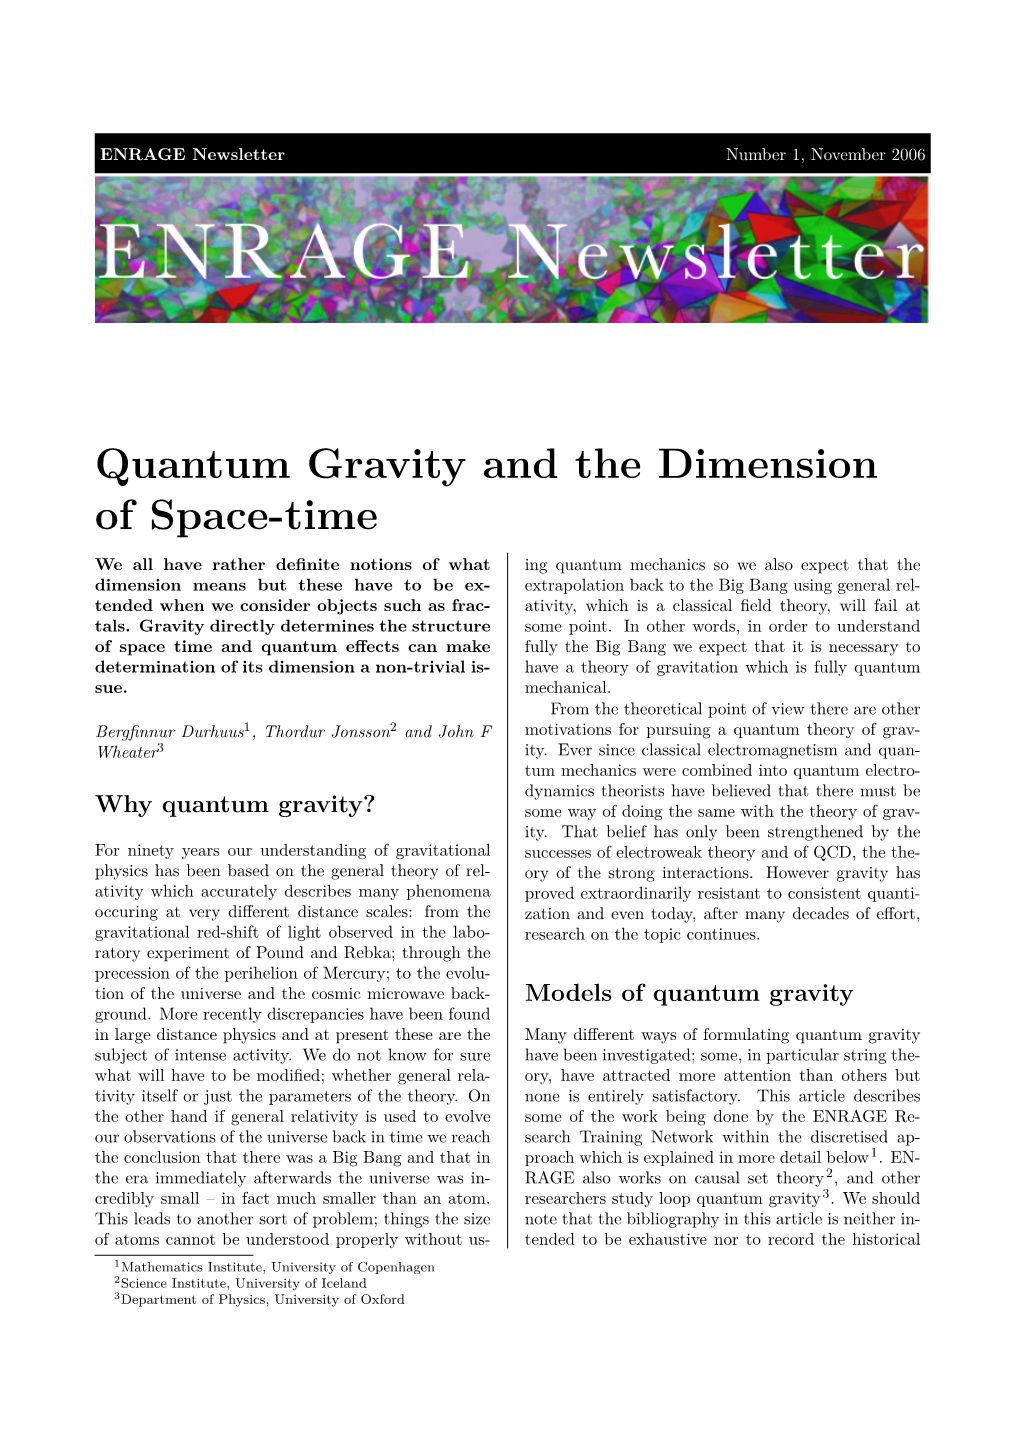 Quantum Gravity and the Dimension of Space-Time